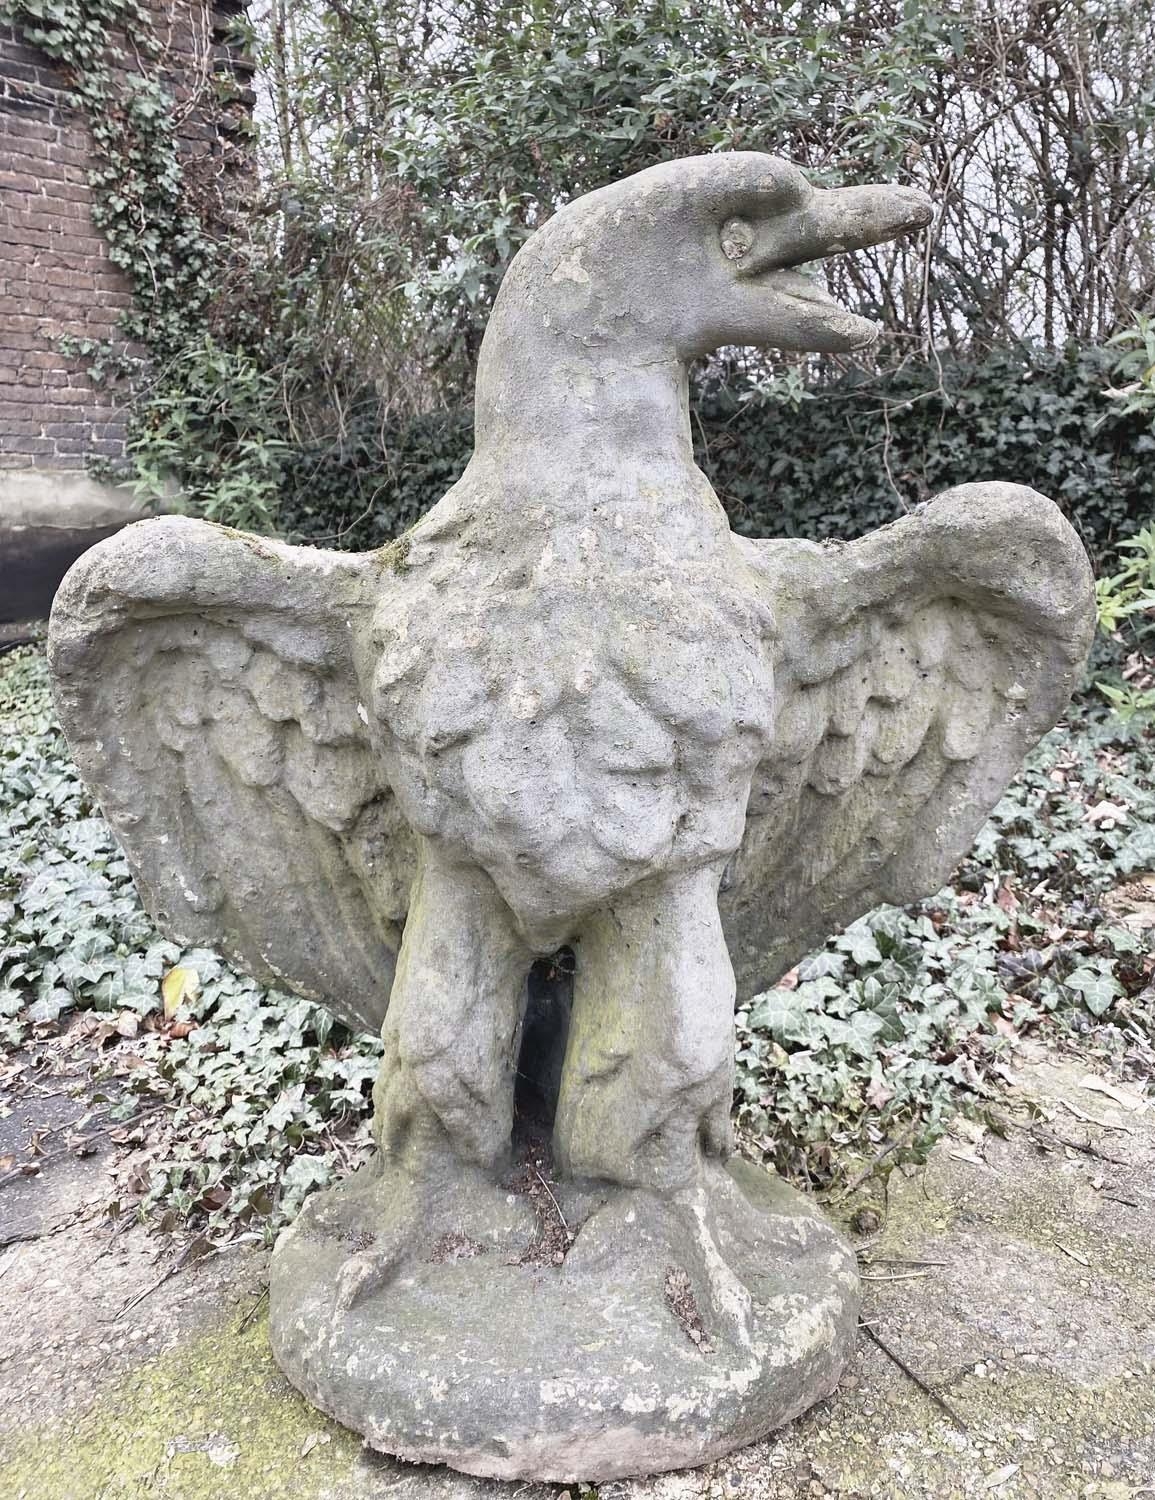 GARDEN STATUE OF AN EAGLE, reconstituted stone in a weathered finish, 81cm H x 75cm W x 46cm D.